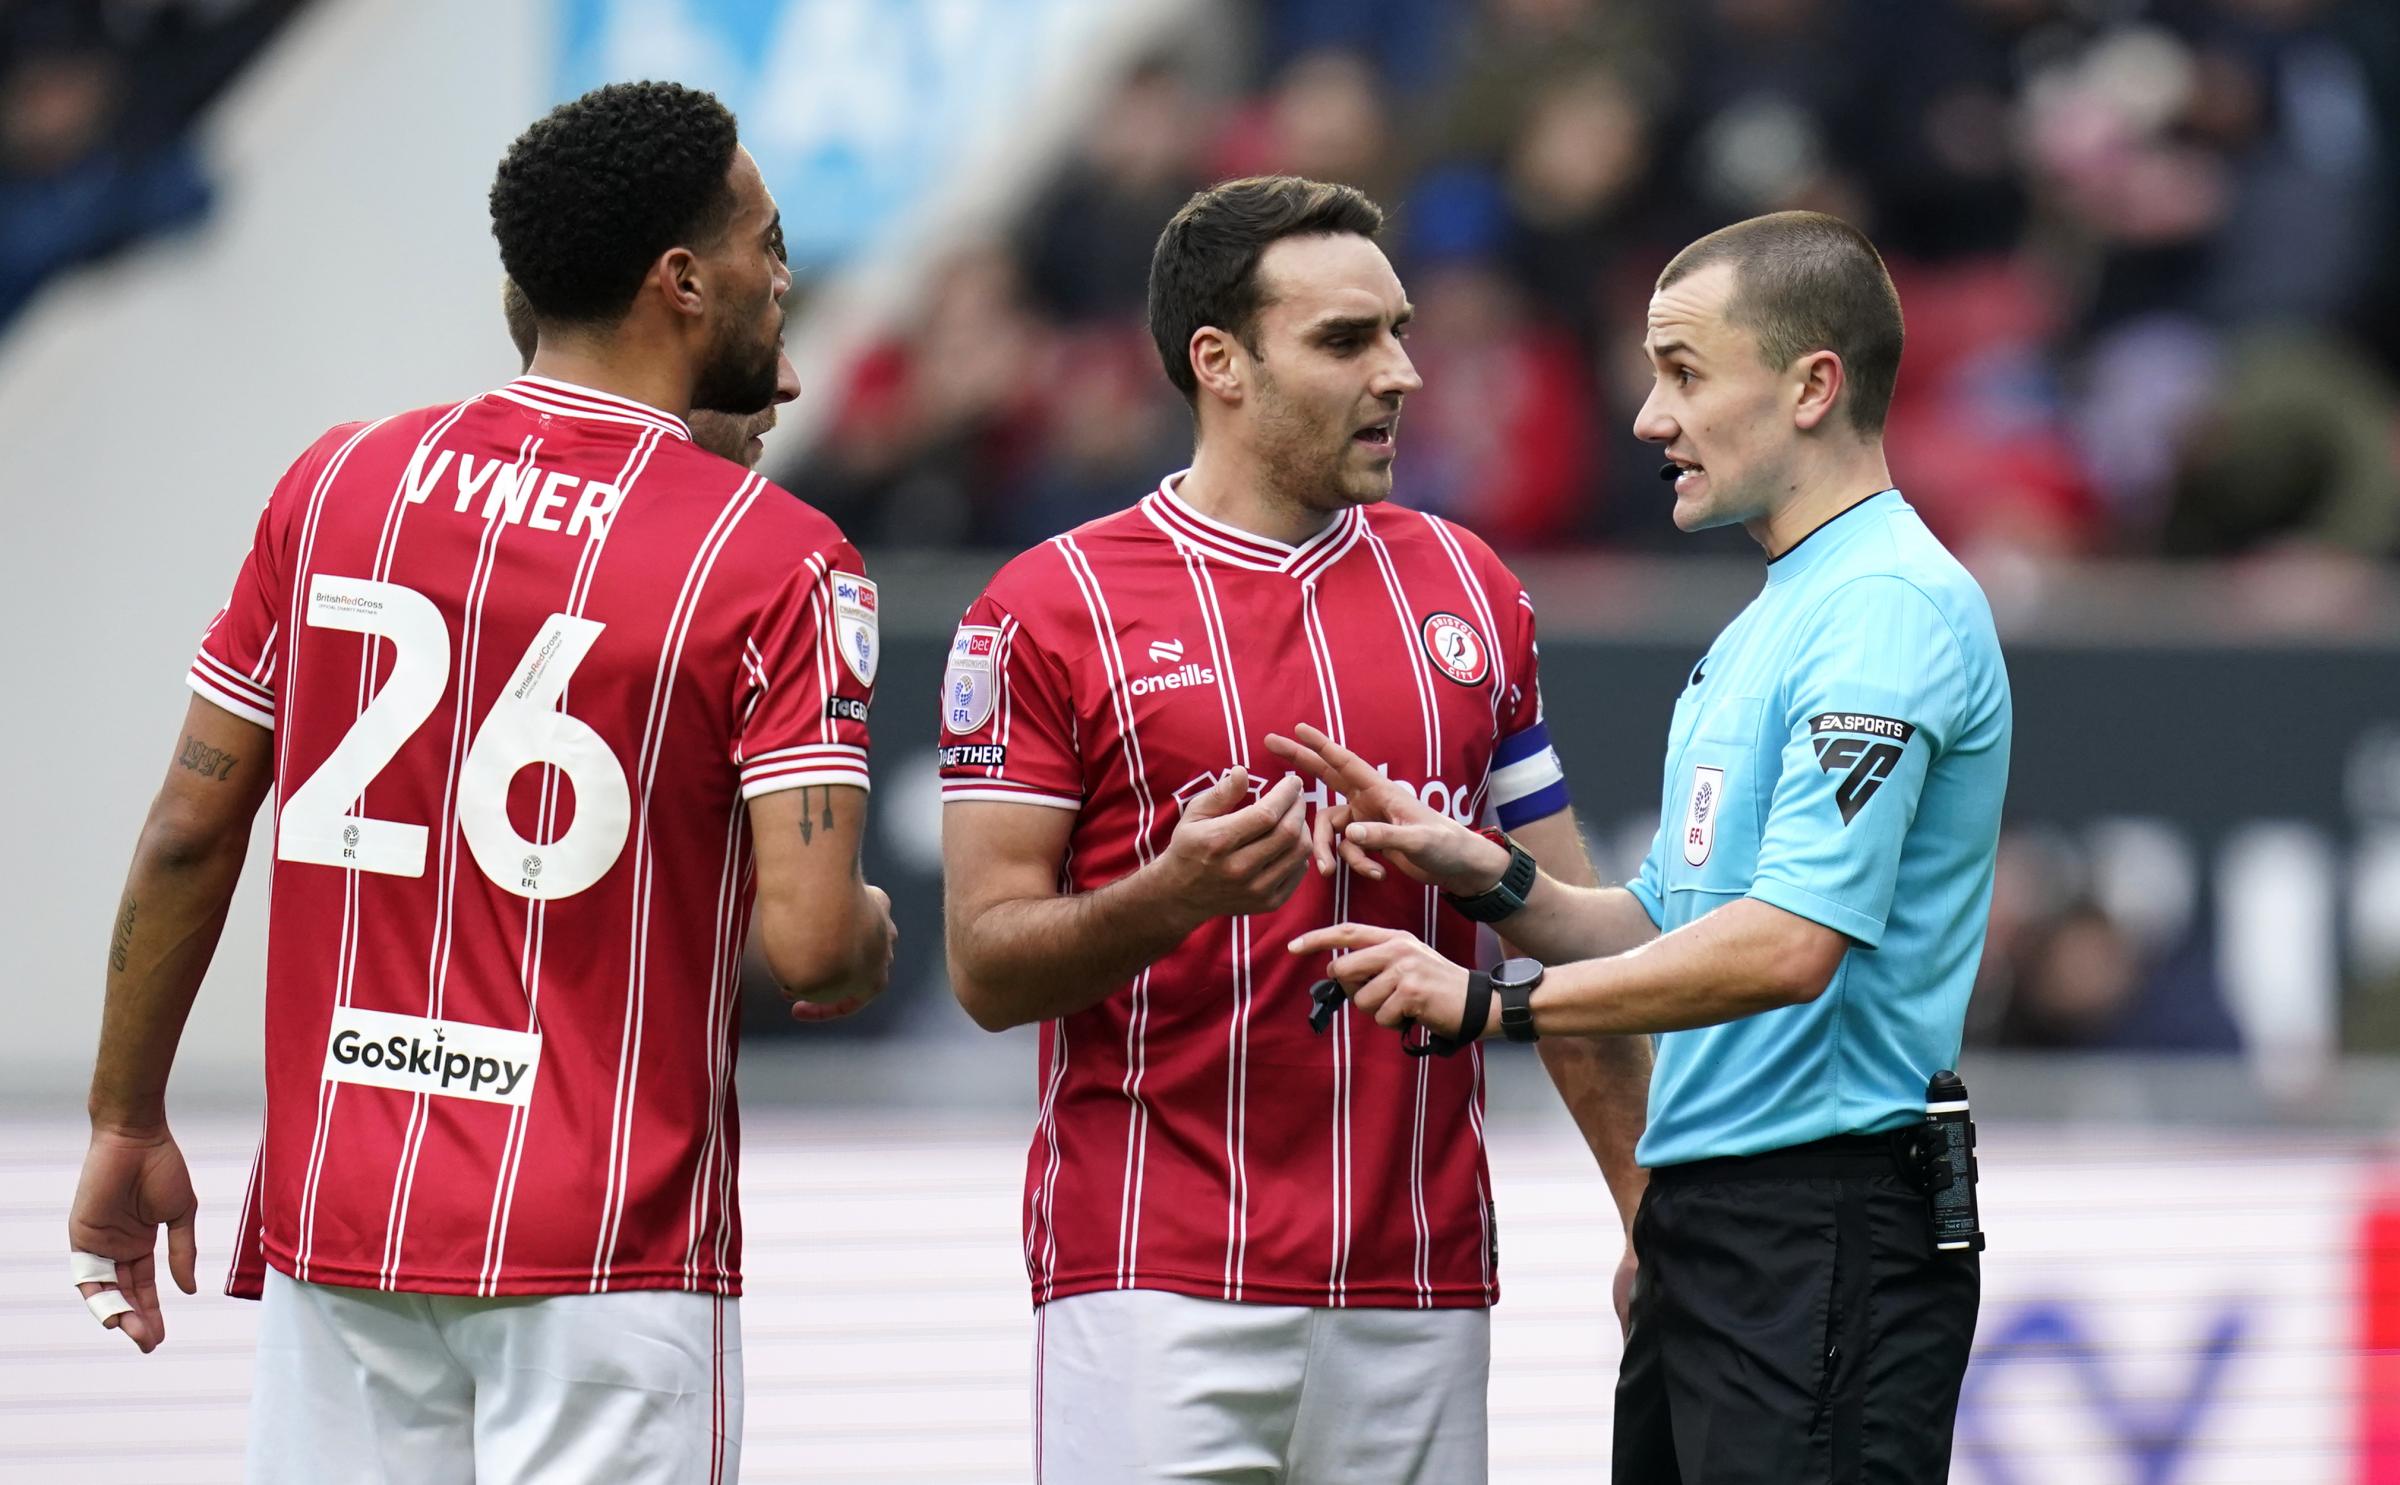 Referee named for Watford's trip to Rotherham United